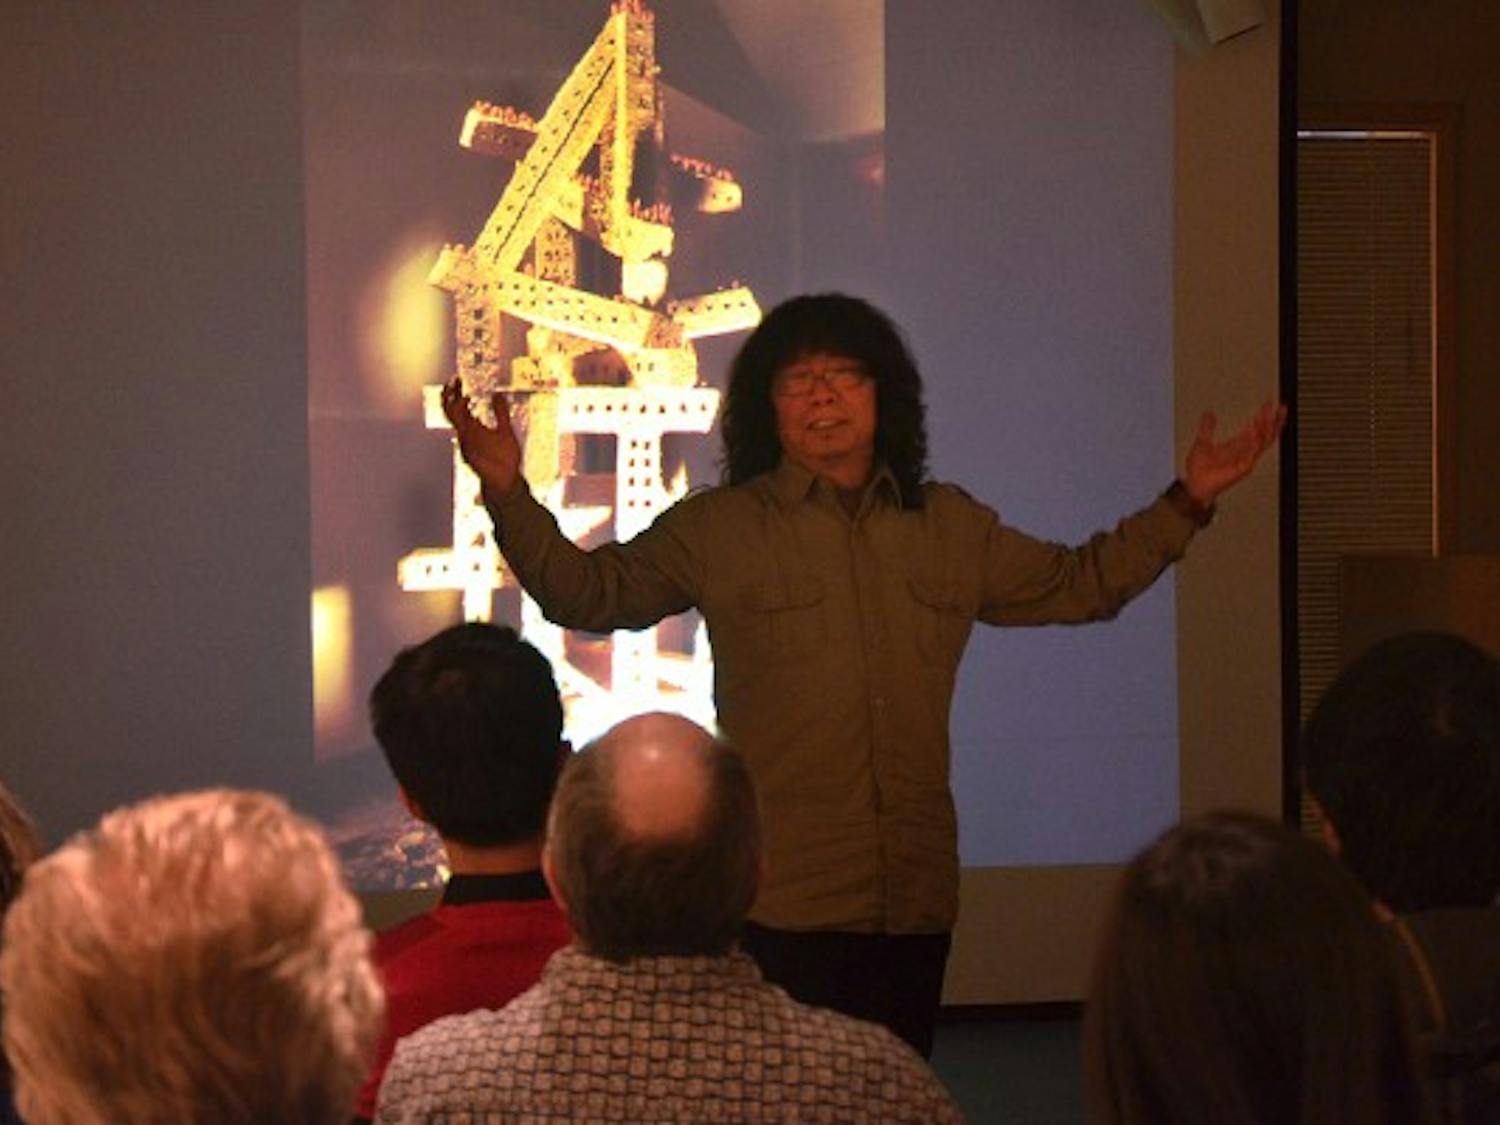 At the ASU Art Museum, with a projector and a humorous narrative, Professor and Ph.D Supervisor of Sichuan University, Dr. He Gong, inspires students to seek their artistic voices, create powerful art, and even travel abroad to discover the world in hopes of capturing it. (Photo by Rachel Nemeh)